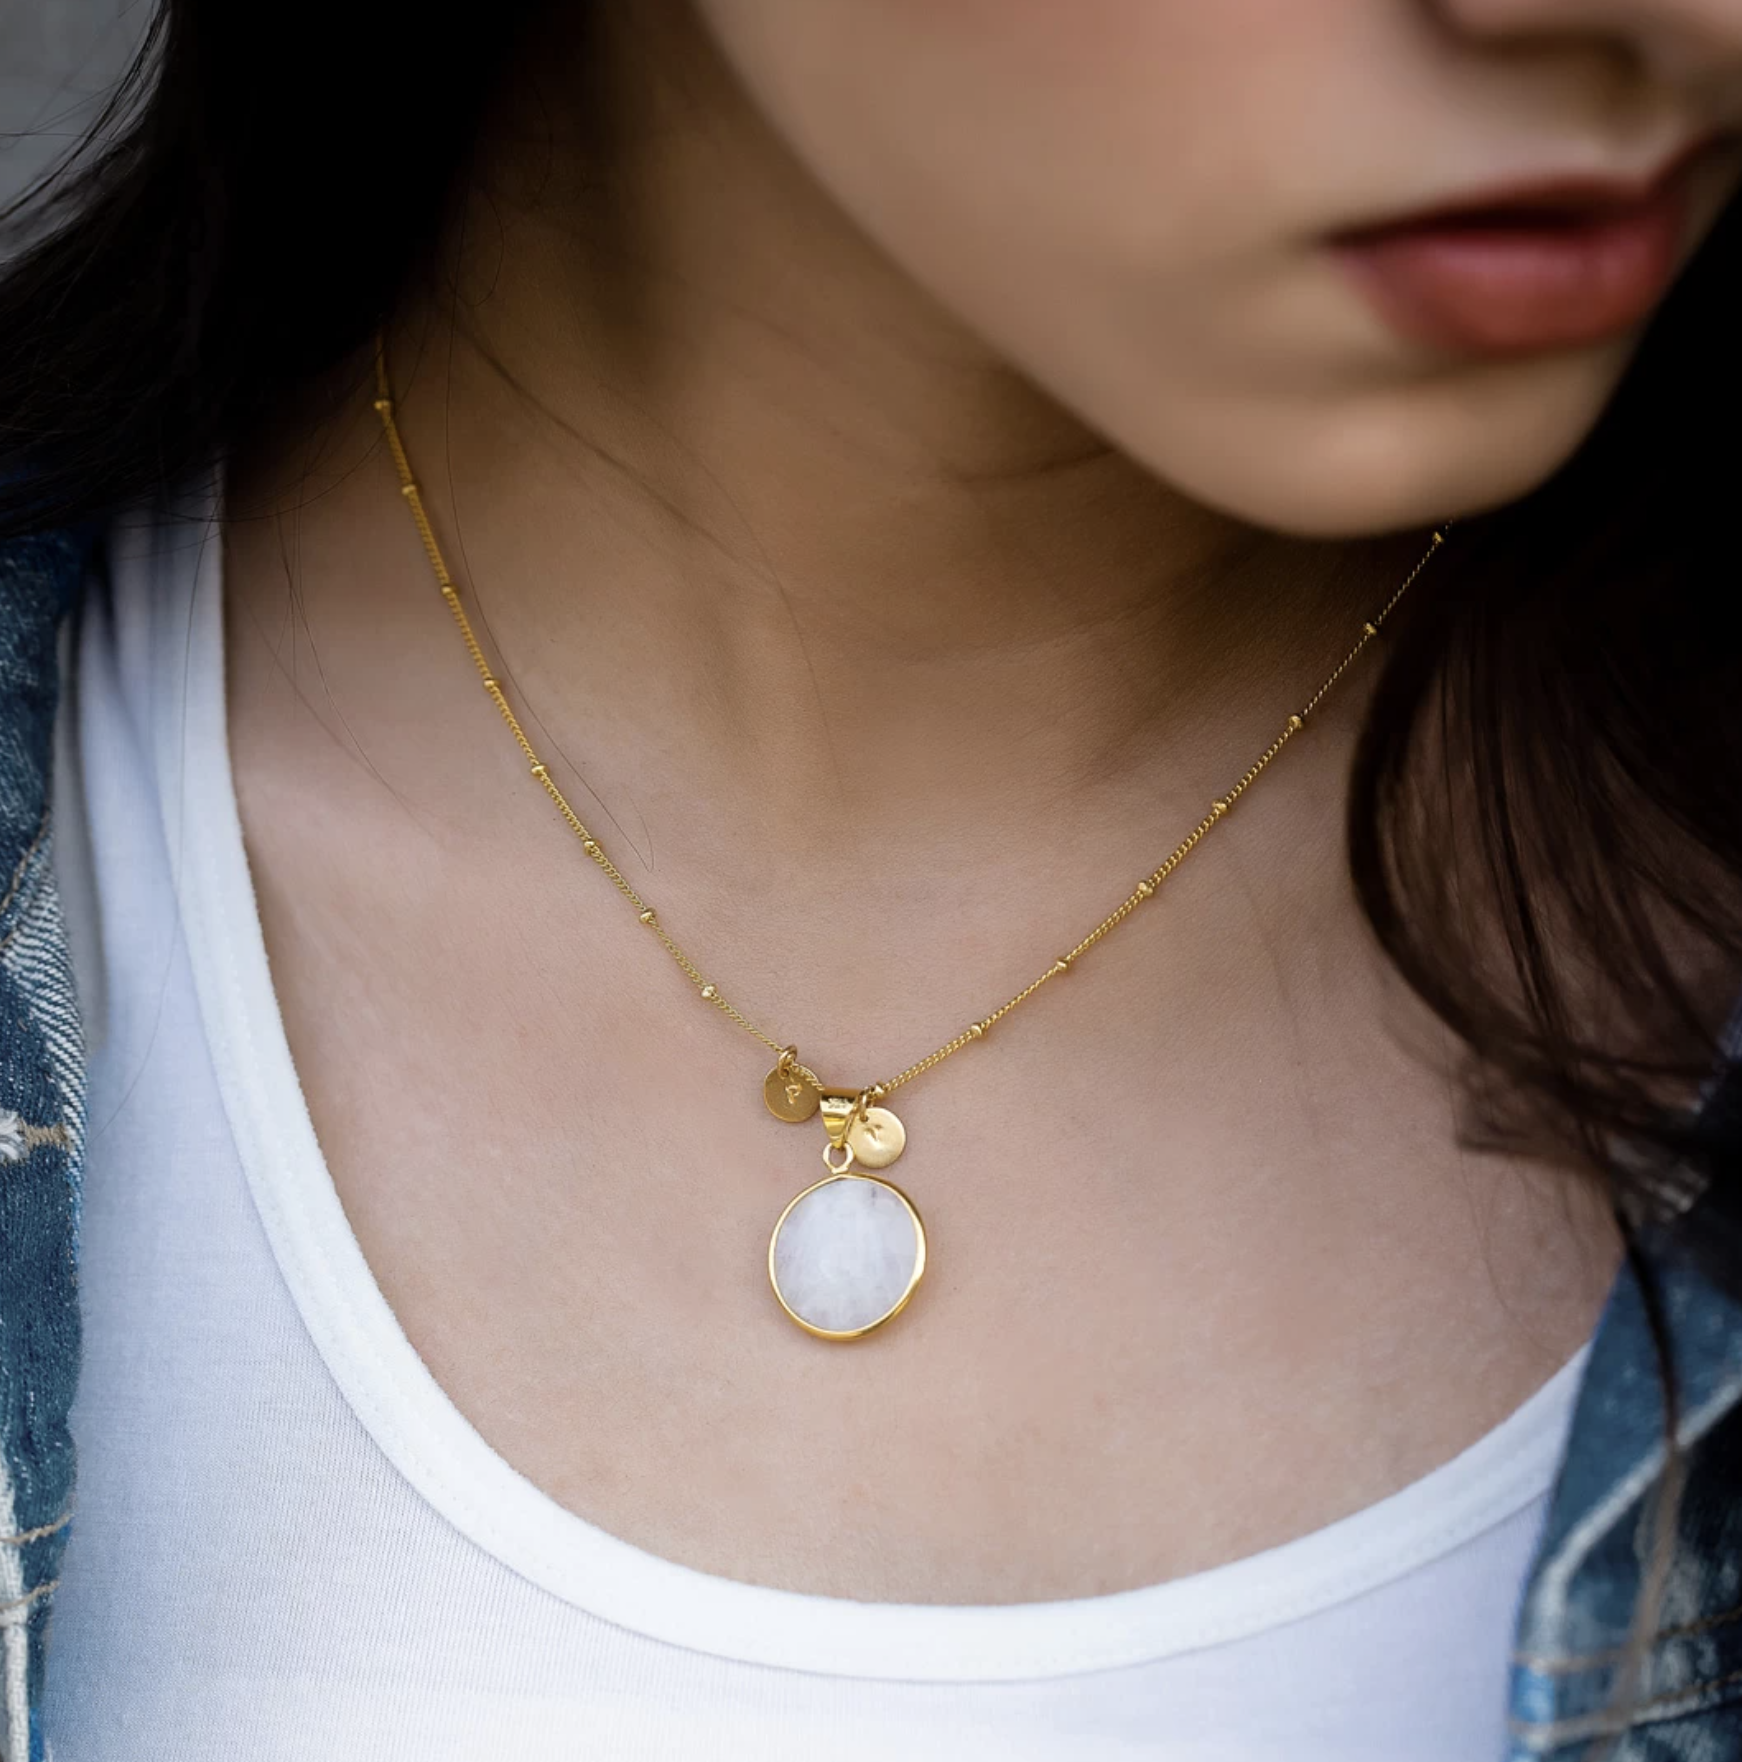 Model wearing customized gold necklace with moonstone attached.